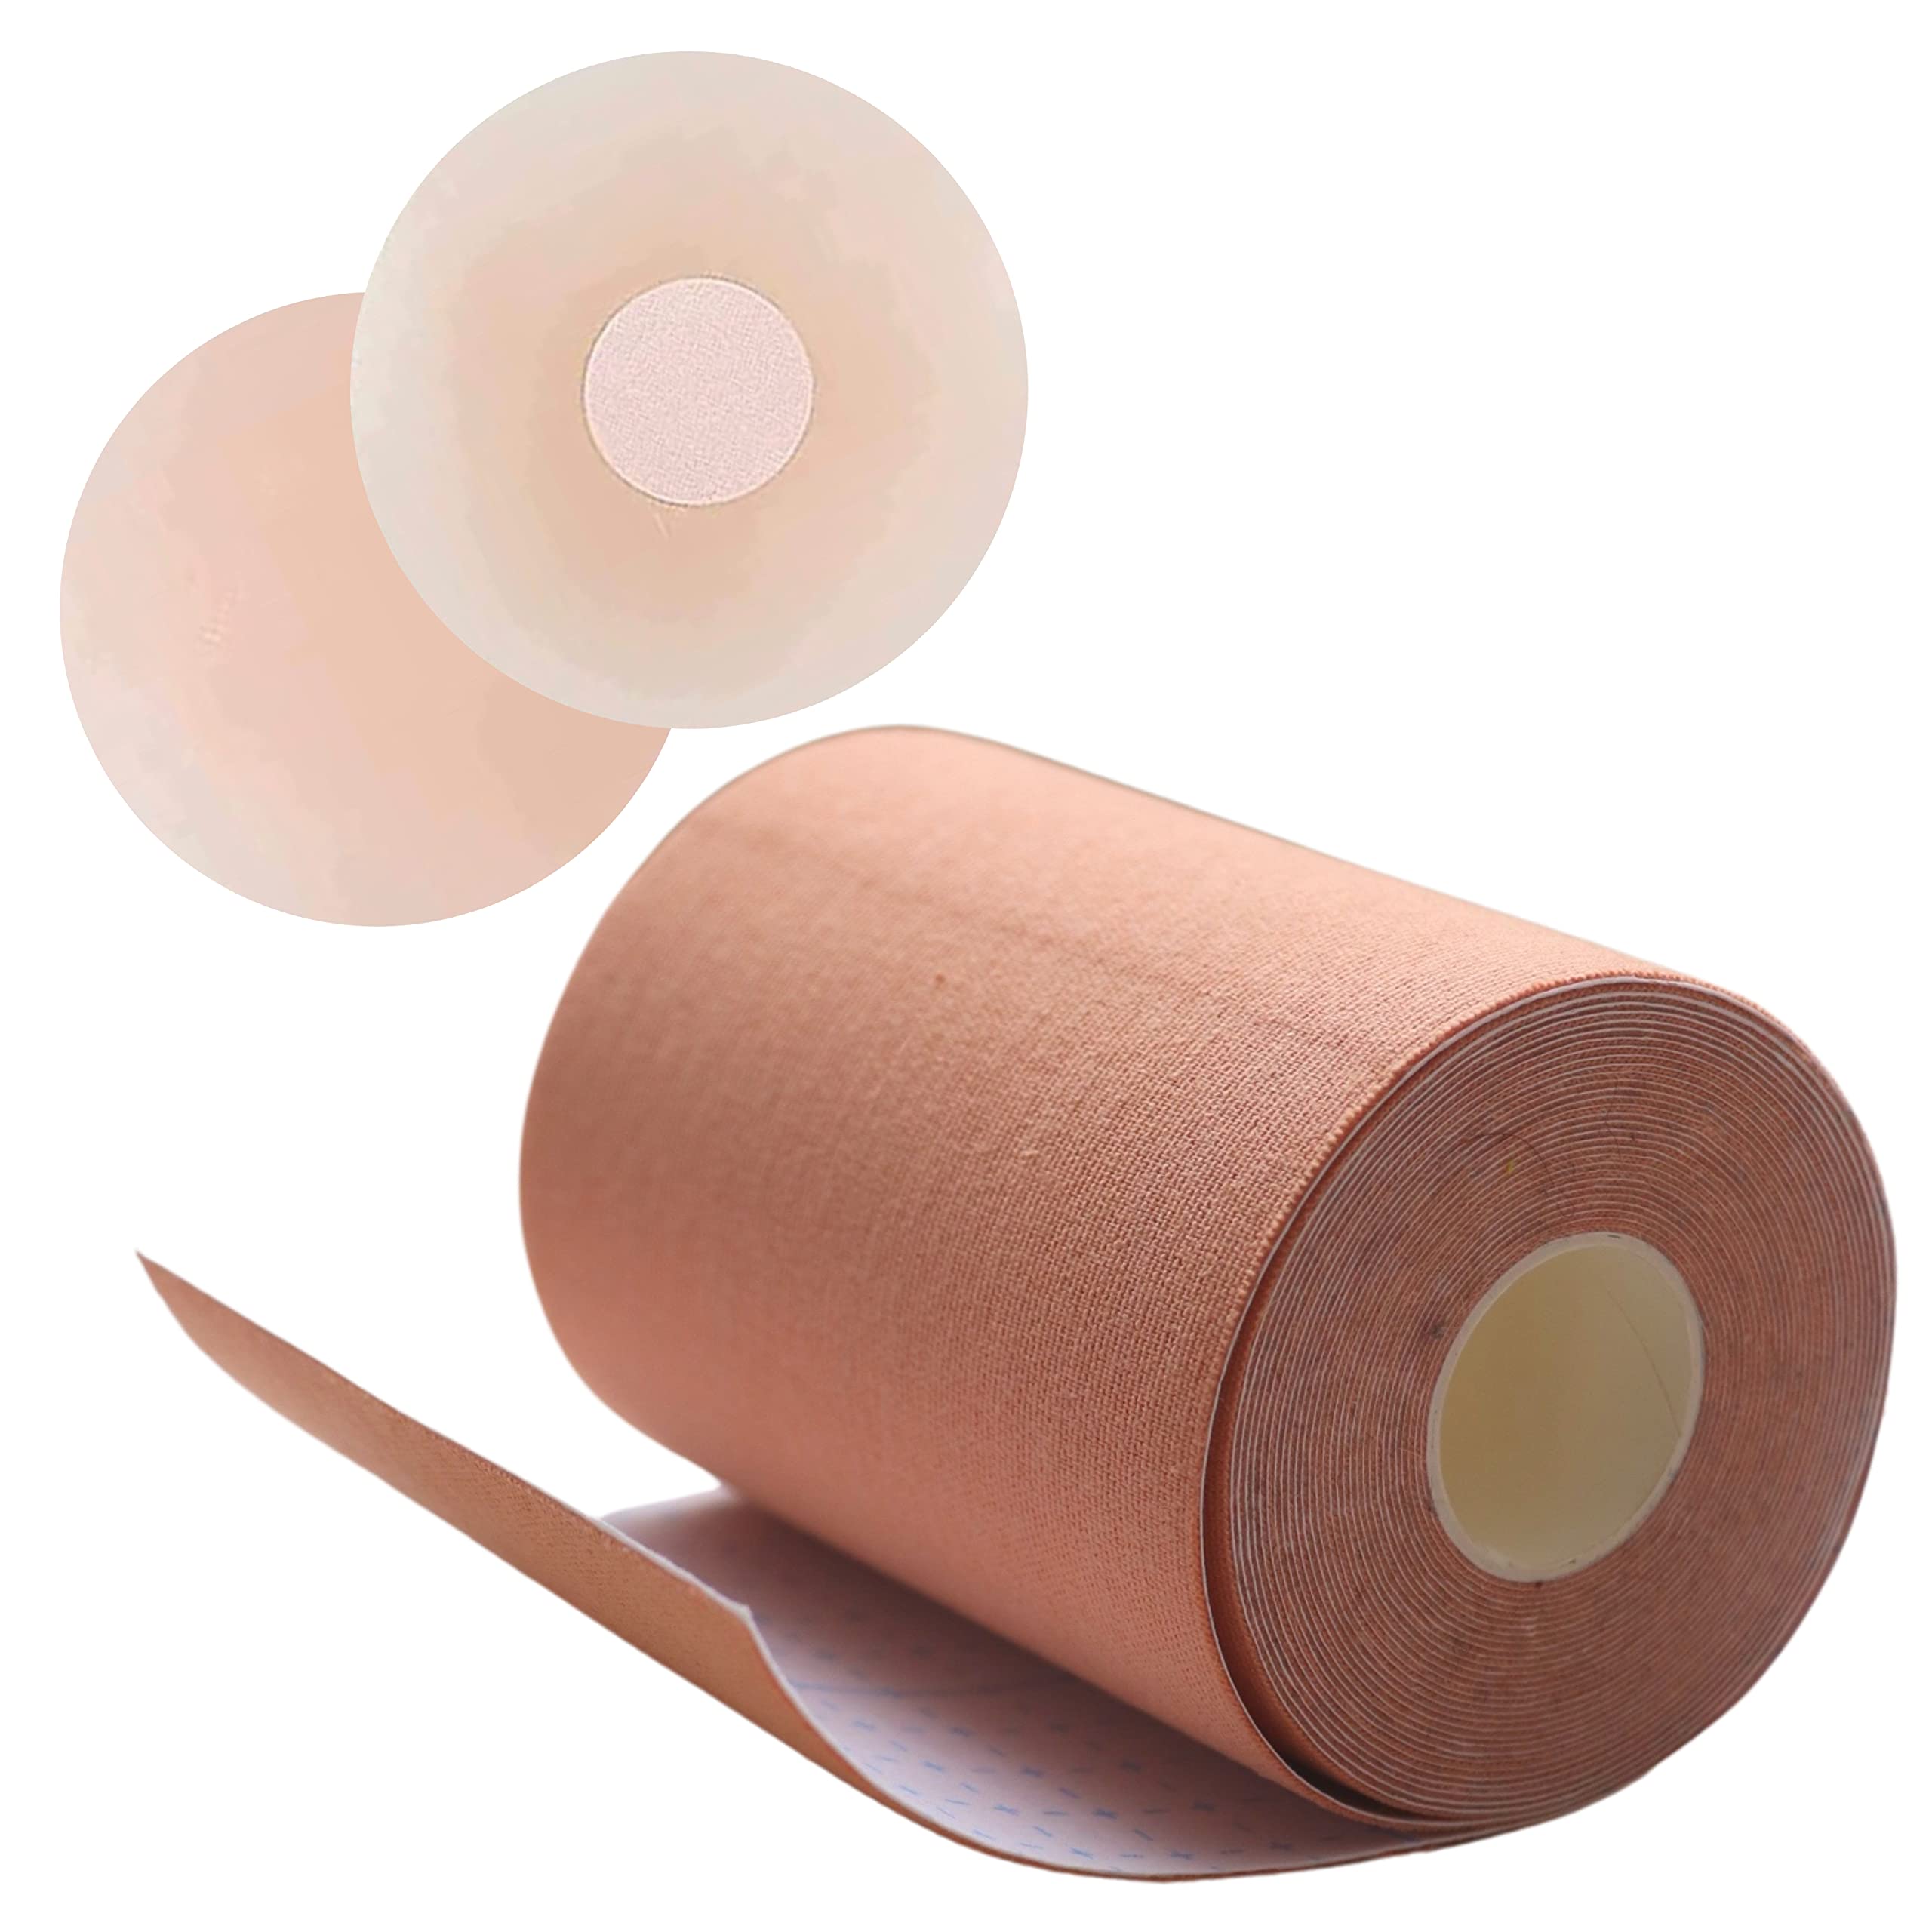 Gsdxz Boobytape for Big Breast, Good Lines Bra Tape, Secret Weapon Breast  Tape, Breast Lift Tape for Backless Dresses & Swimsuits (Beige+plum